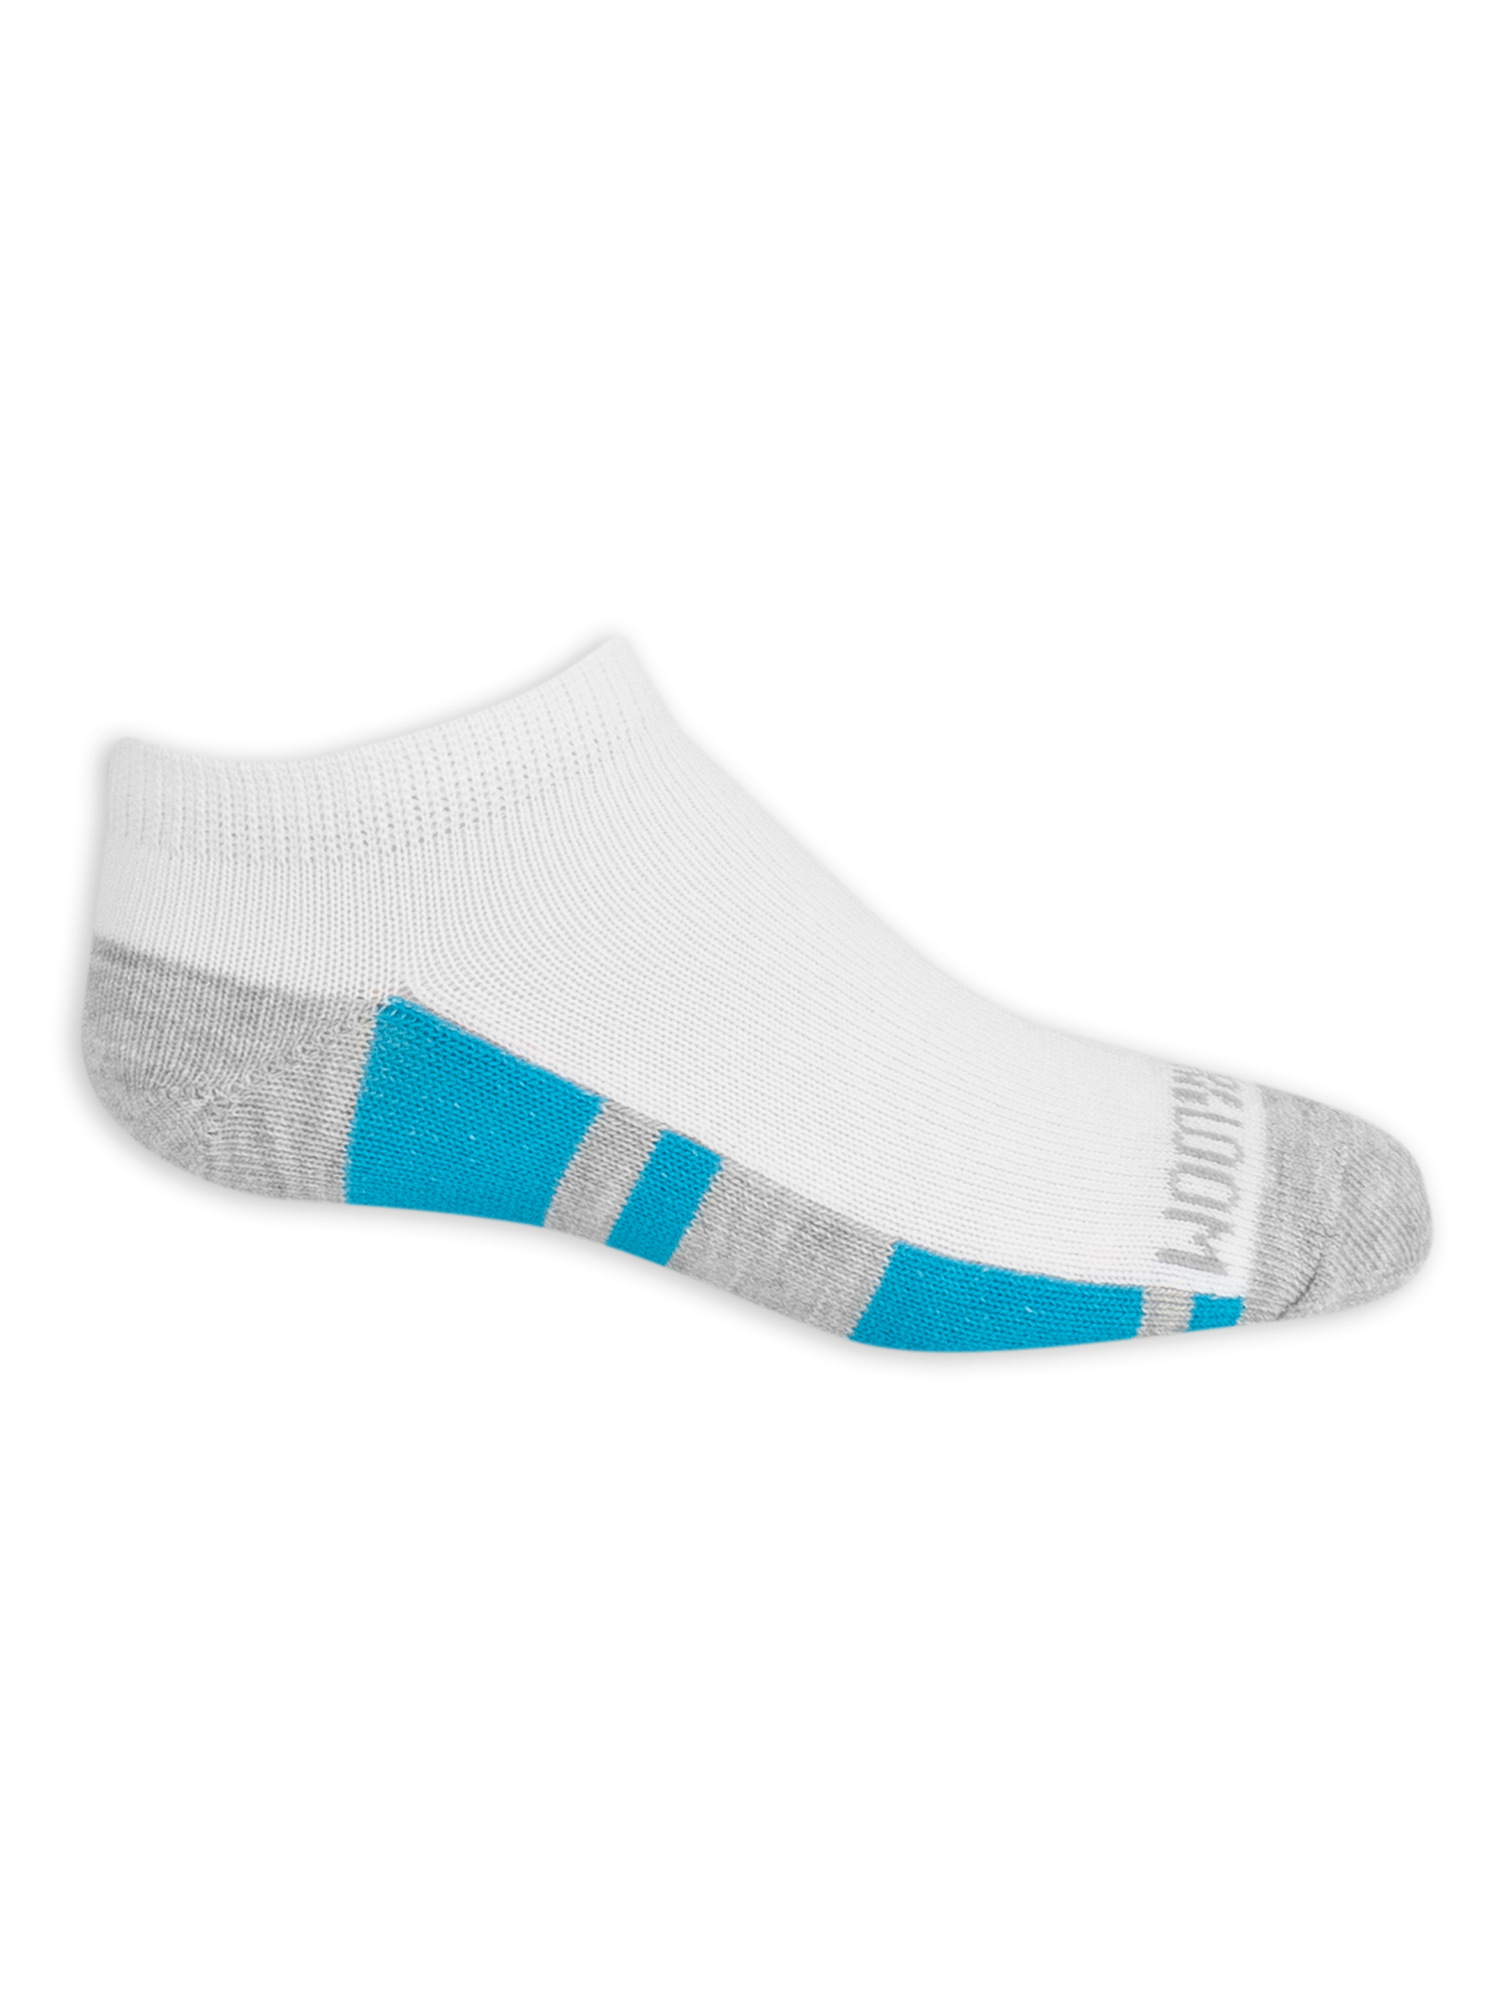 Fruit of the Loom No-Show Durable Solid Striped Socks (Big Boys or Little Boys) 10 Pack - image 4 of 5